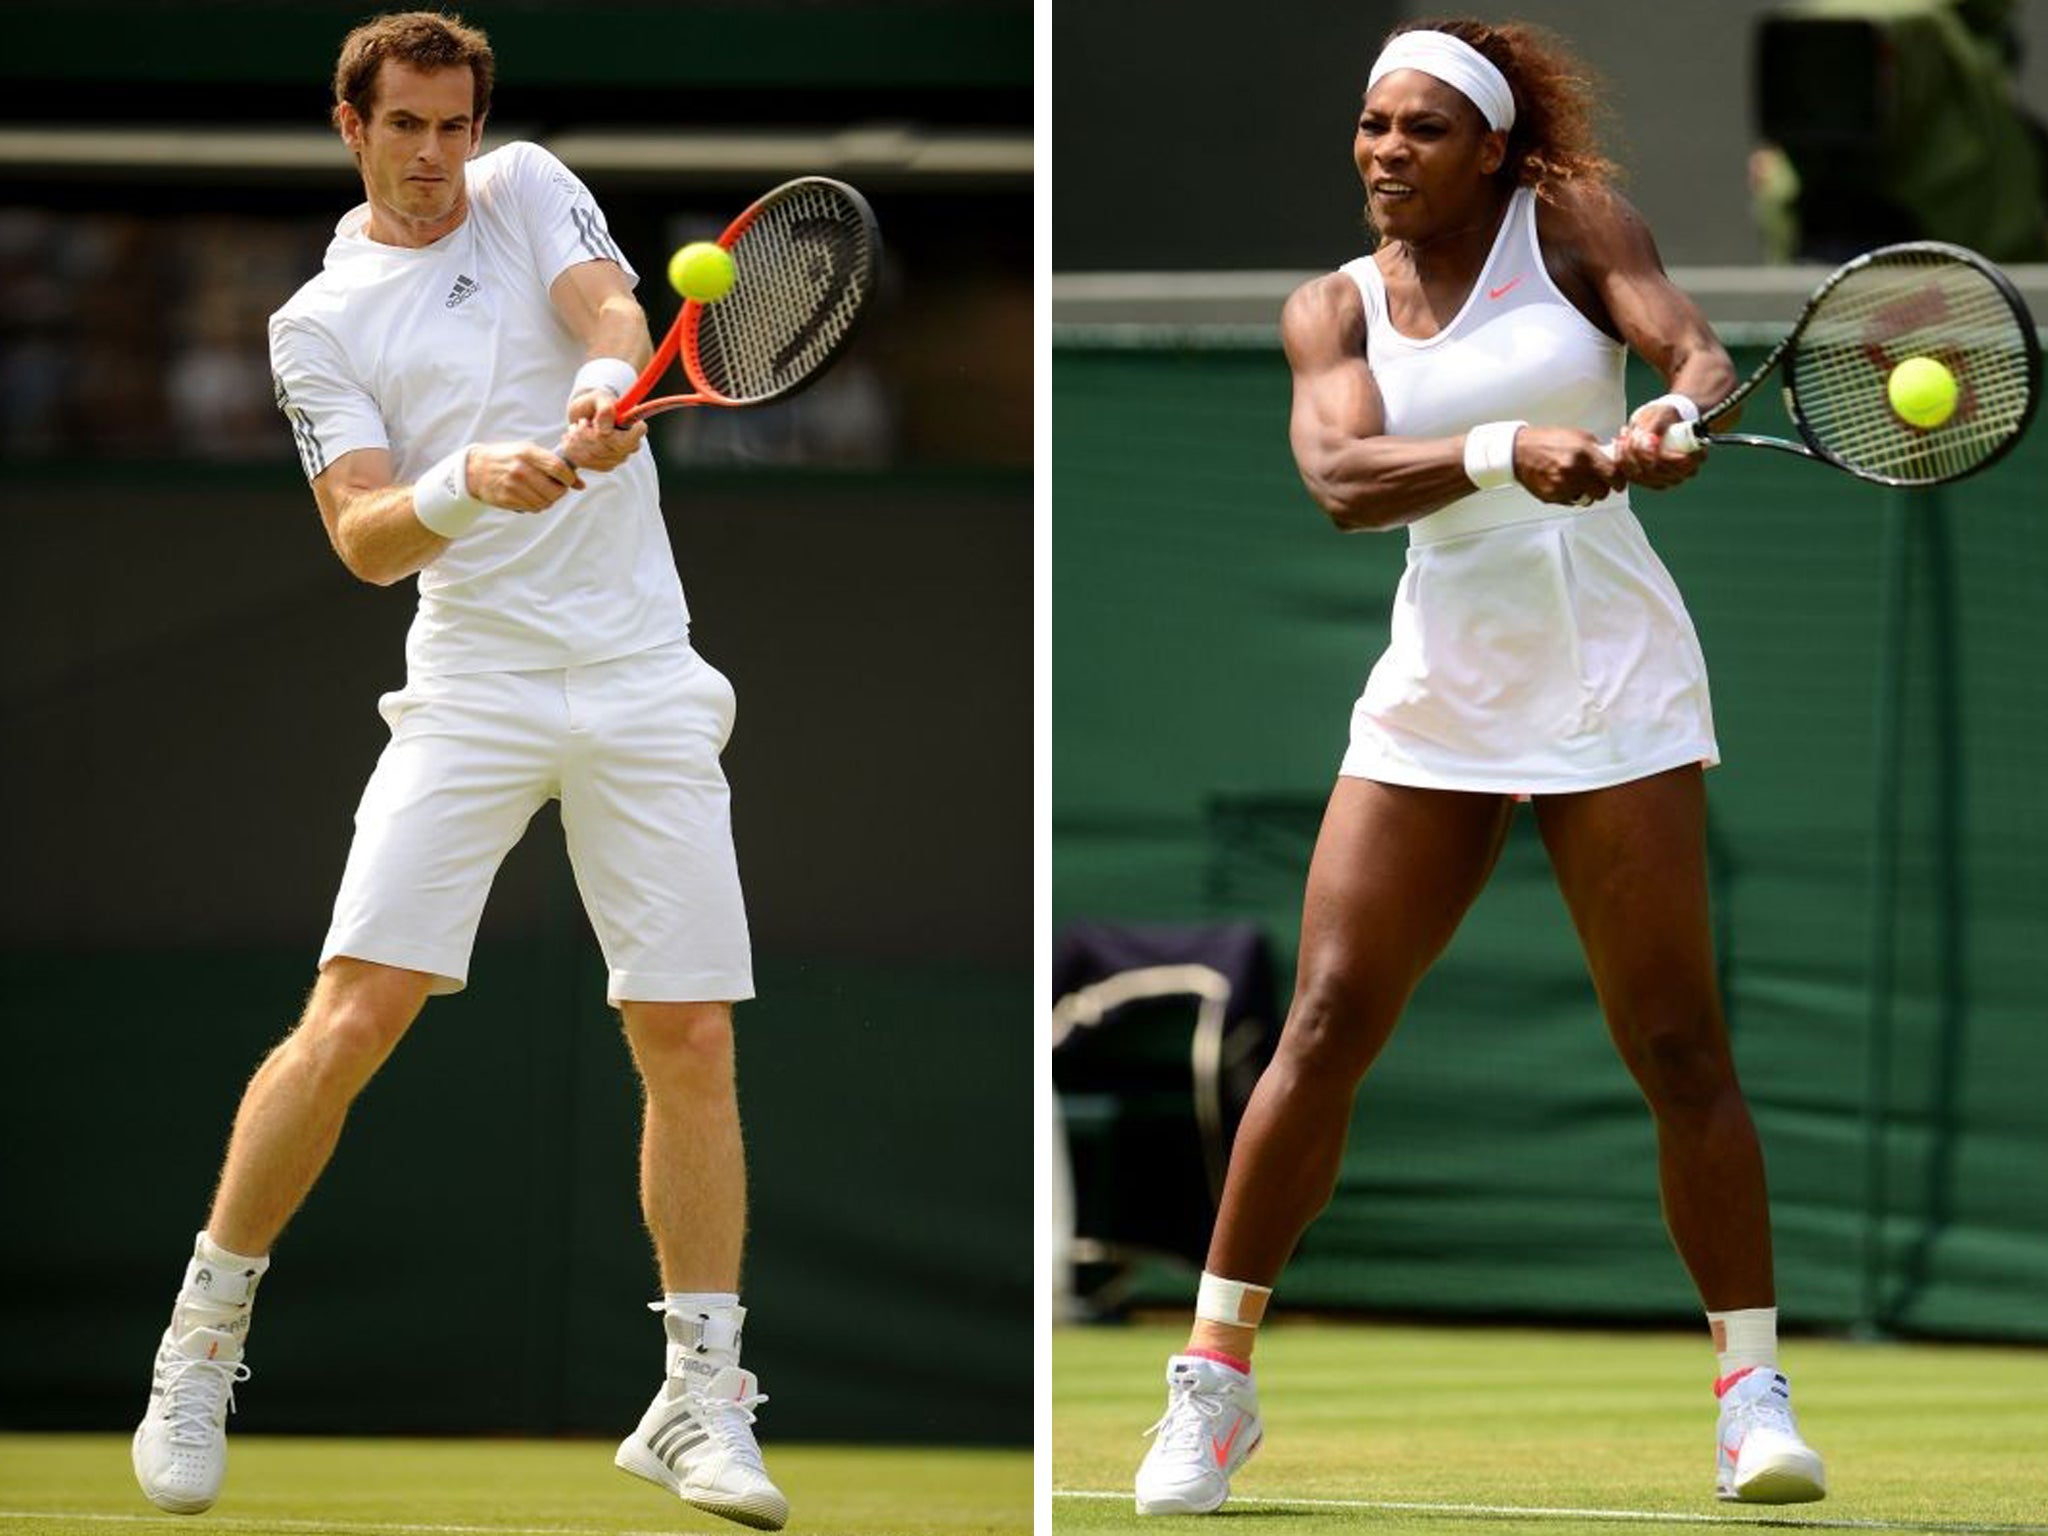 Andy Murray v Serena Williams? I'd be up for it, he says. That would be fun, she says.